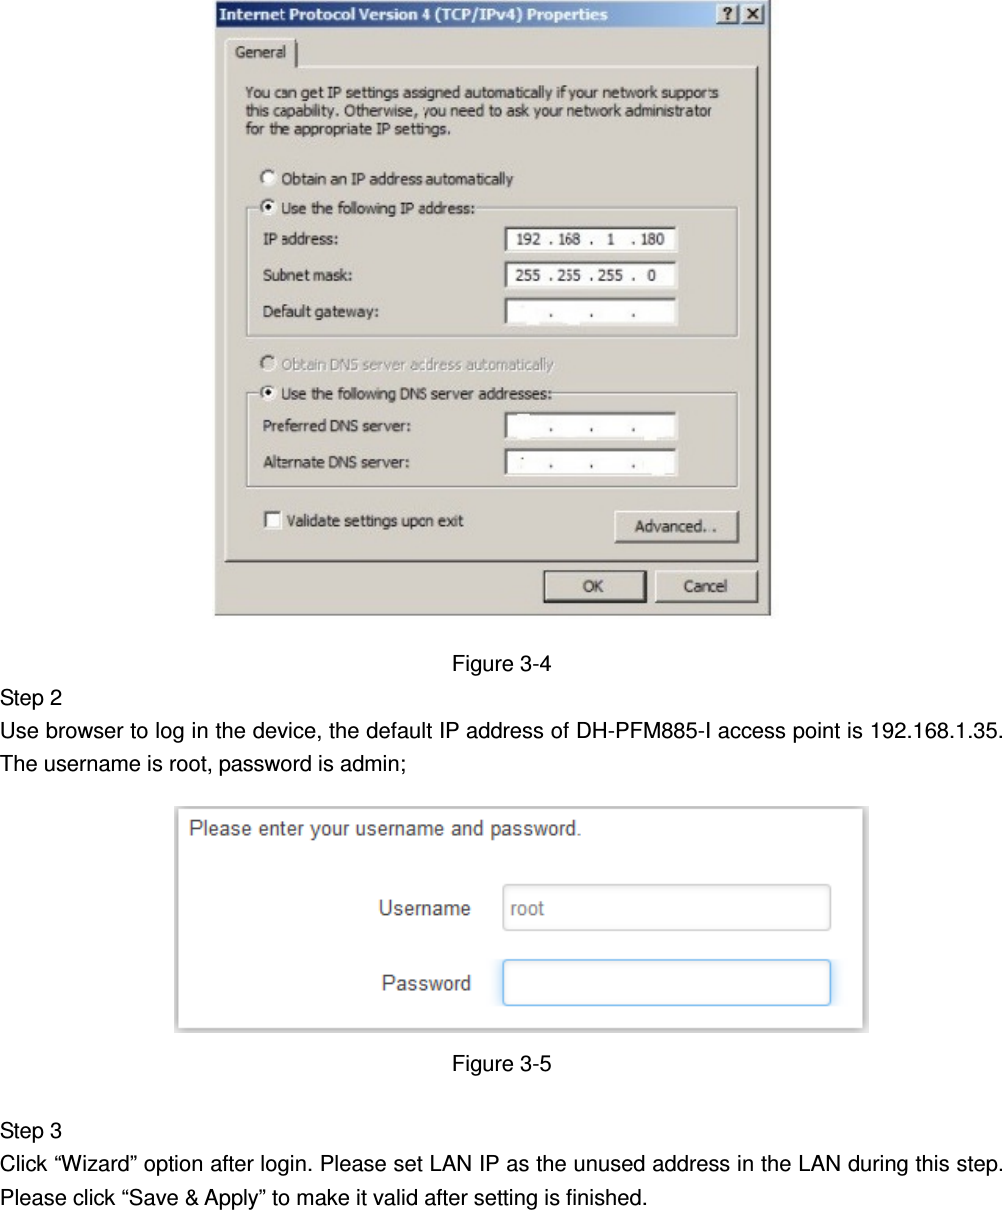                        Figure 3-4 Step 2   Use browser to log in the device, the default IP address of DH-PFM885-I access point is 192.168.1.35. The username is root, password is admin;           Figure 3-5  Step 3   Click “Wizard” option after login. Please set LAN IP as the unused address in the LAN during this step. Please click “Save &amp; Apply” to make it valid after setting is finished.       